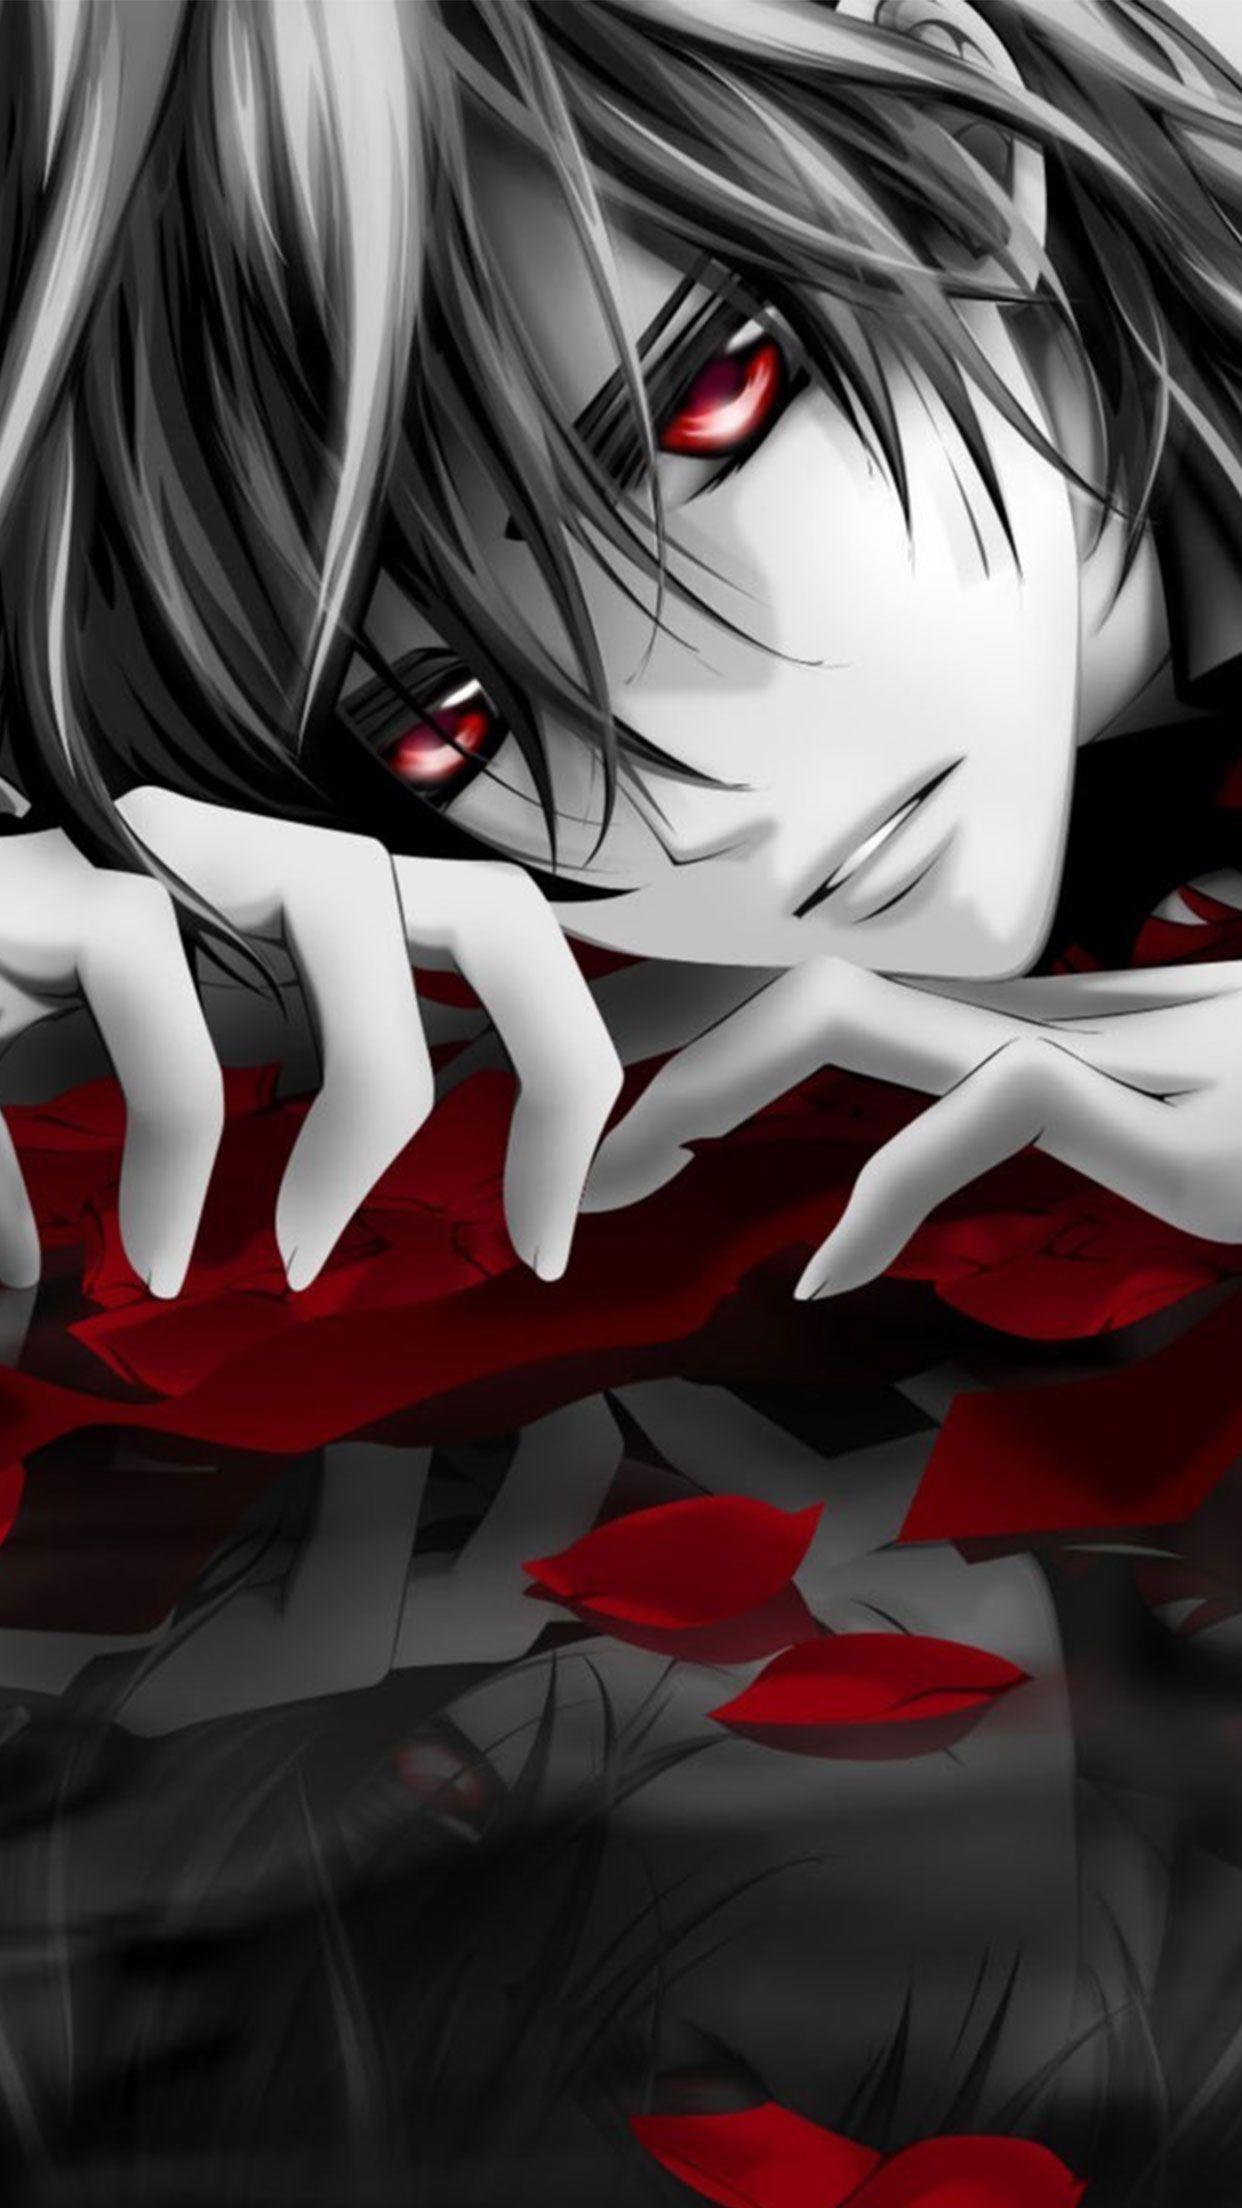 Vampire knight Kaname anime wallpaper #iPhone #android